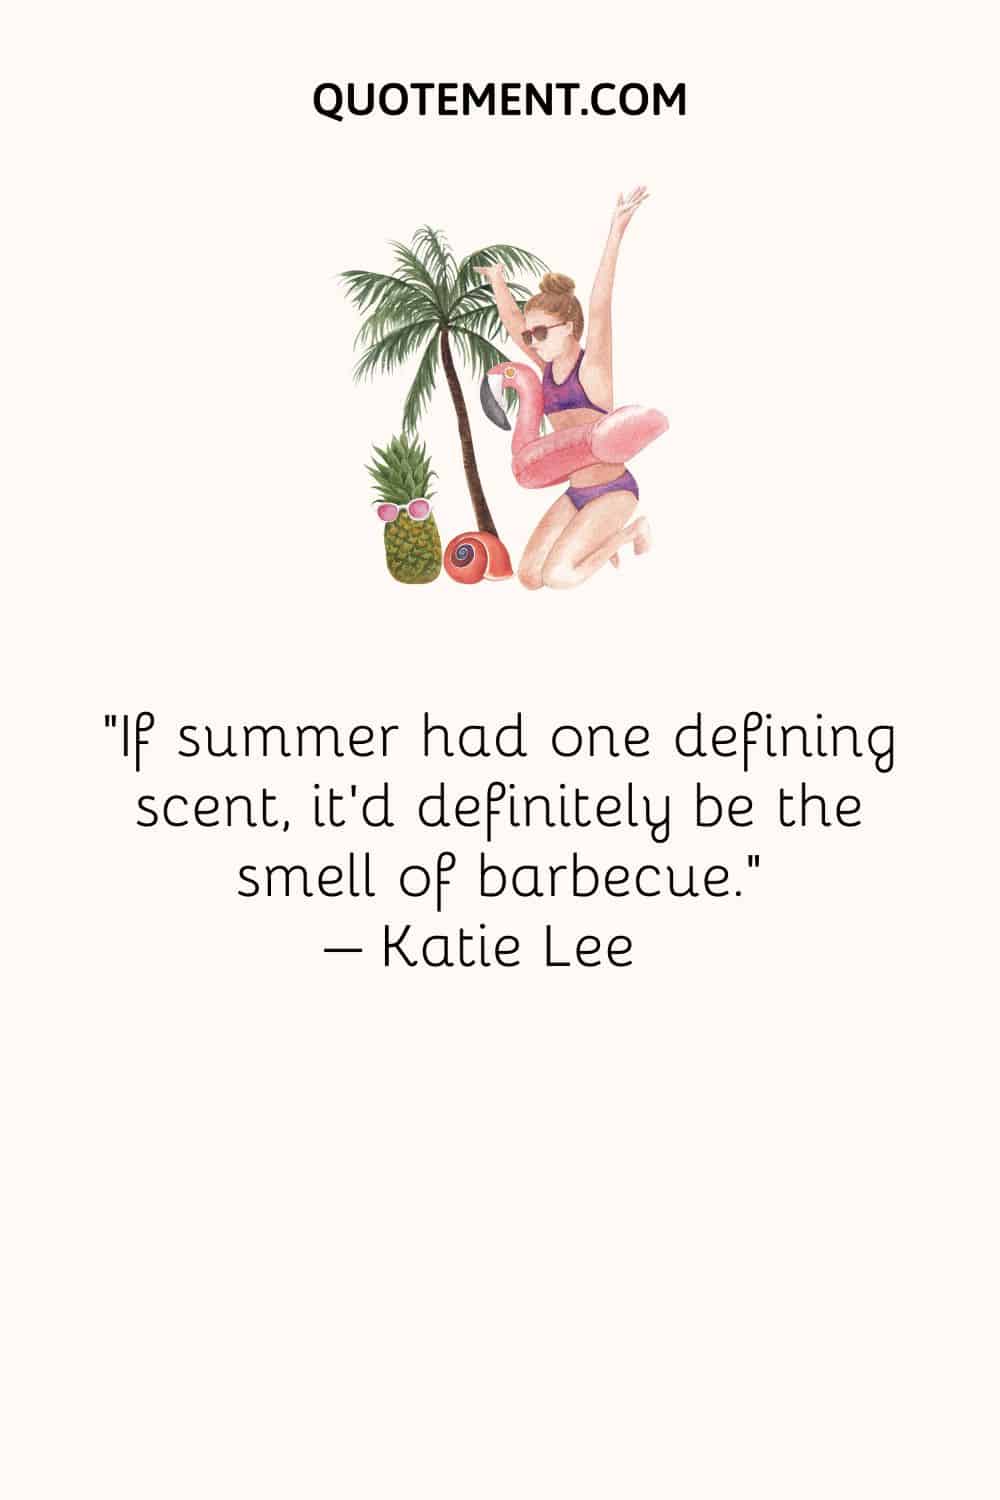 If summer had one defining scent, it’d definitely be the smell of barbecue. – Katie Lee